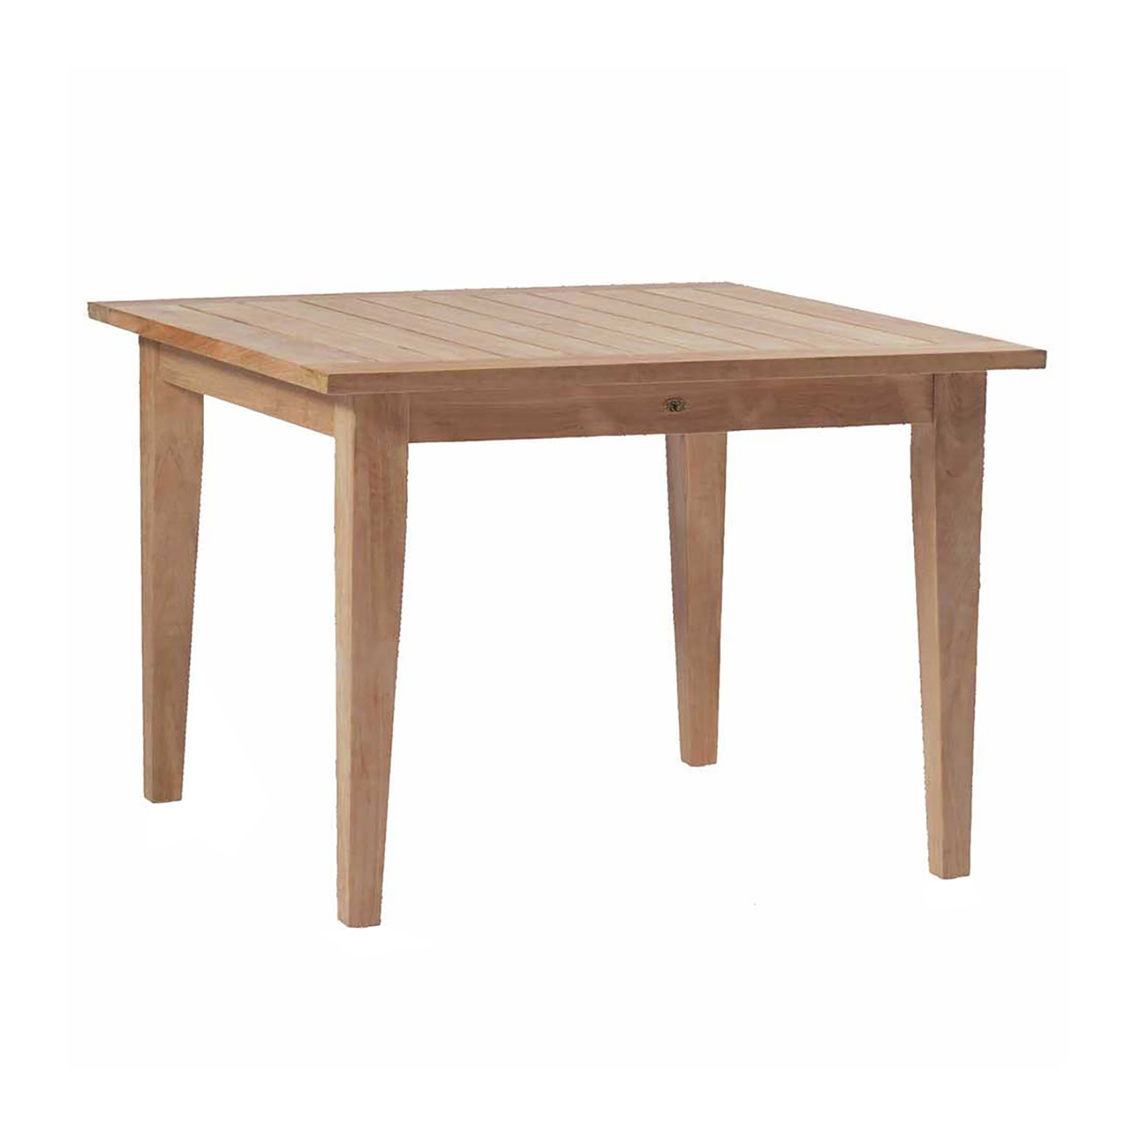 farm table square in natural teak (w/ hole) product image